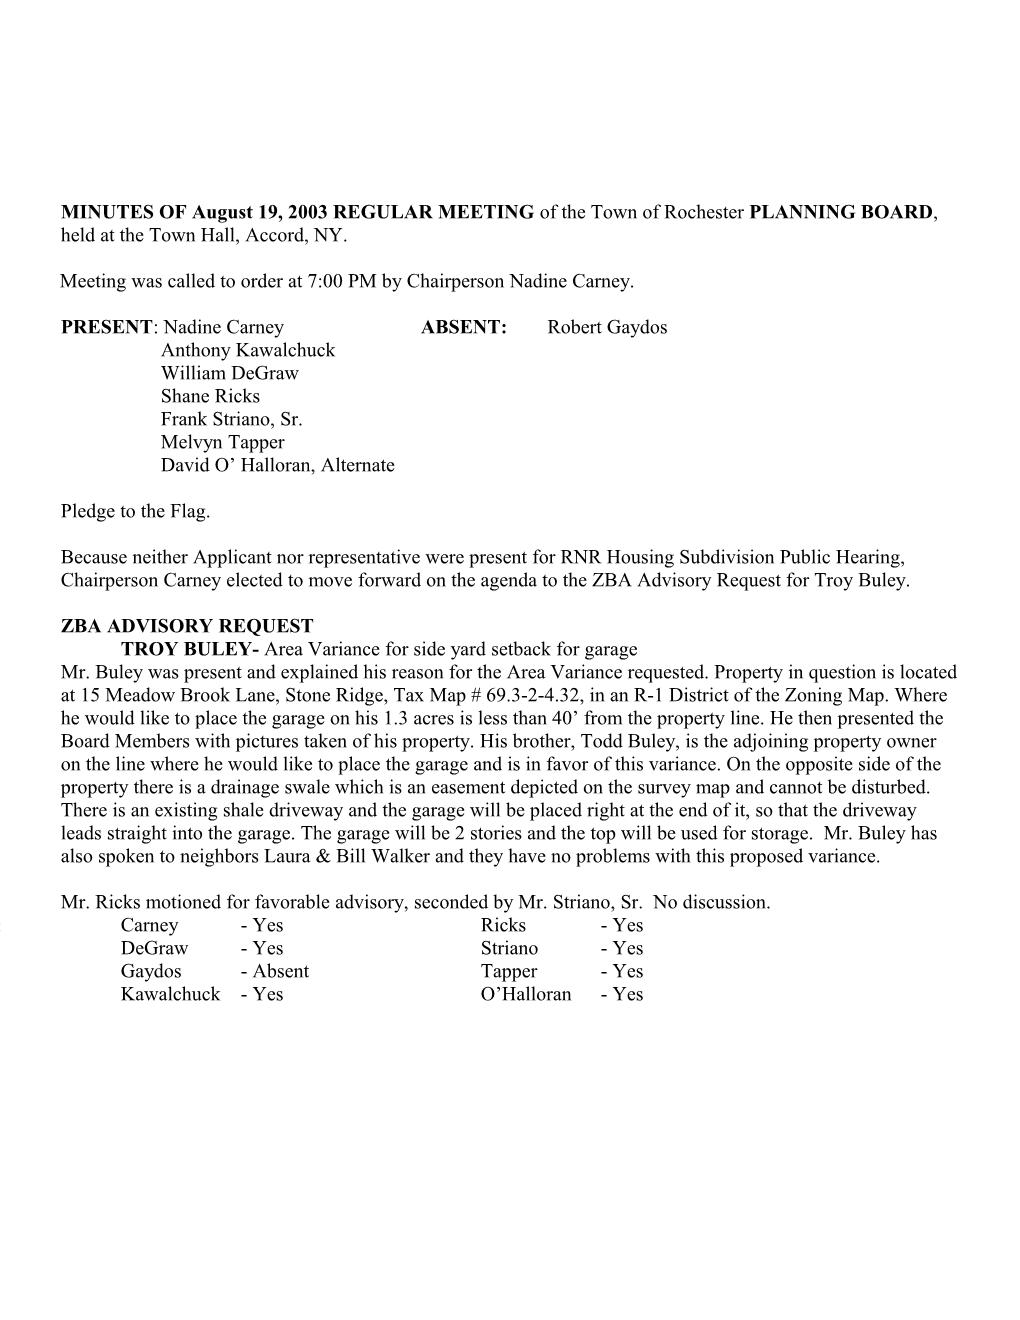 MINUTES of August 19, 2003 REGULAR MEETING of the Town of Rochester PLANNING BOARD, Held